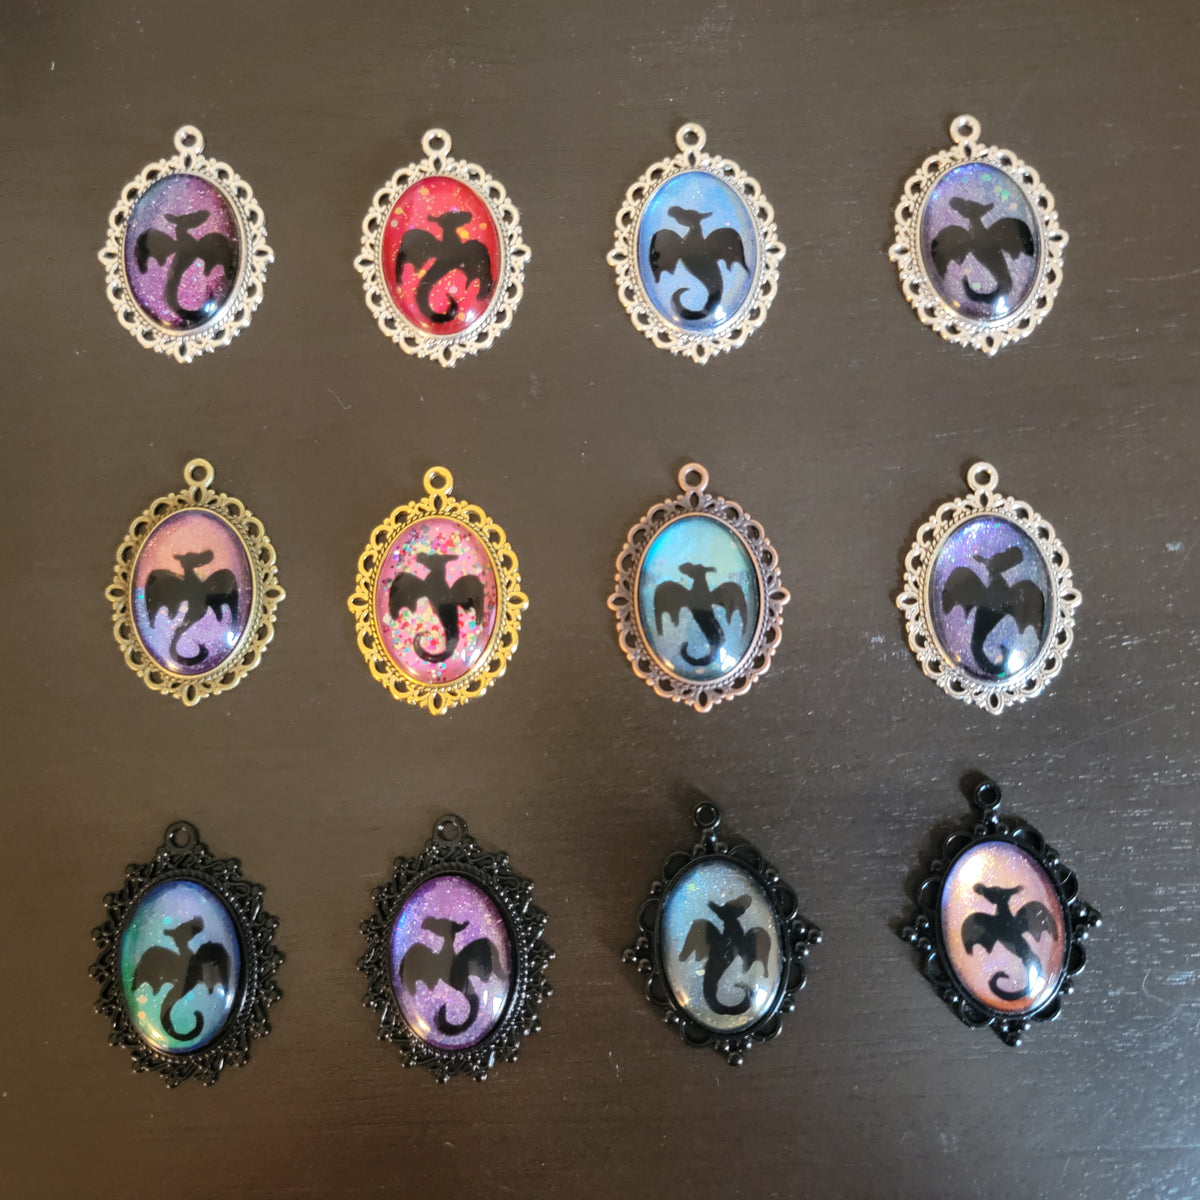 Small Painted Dragon Pendants Various Colors